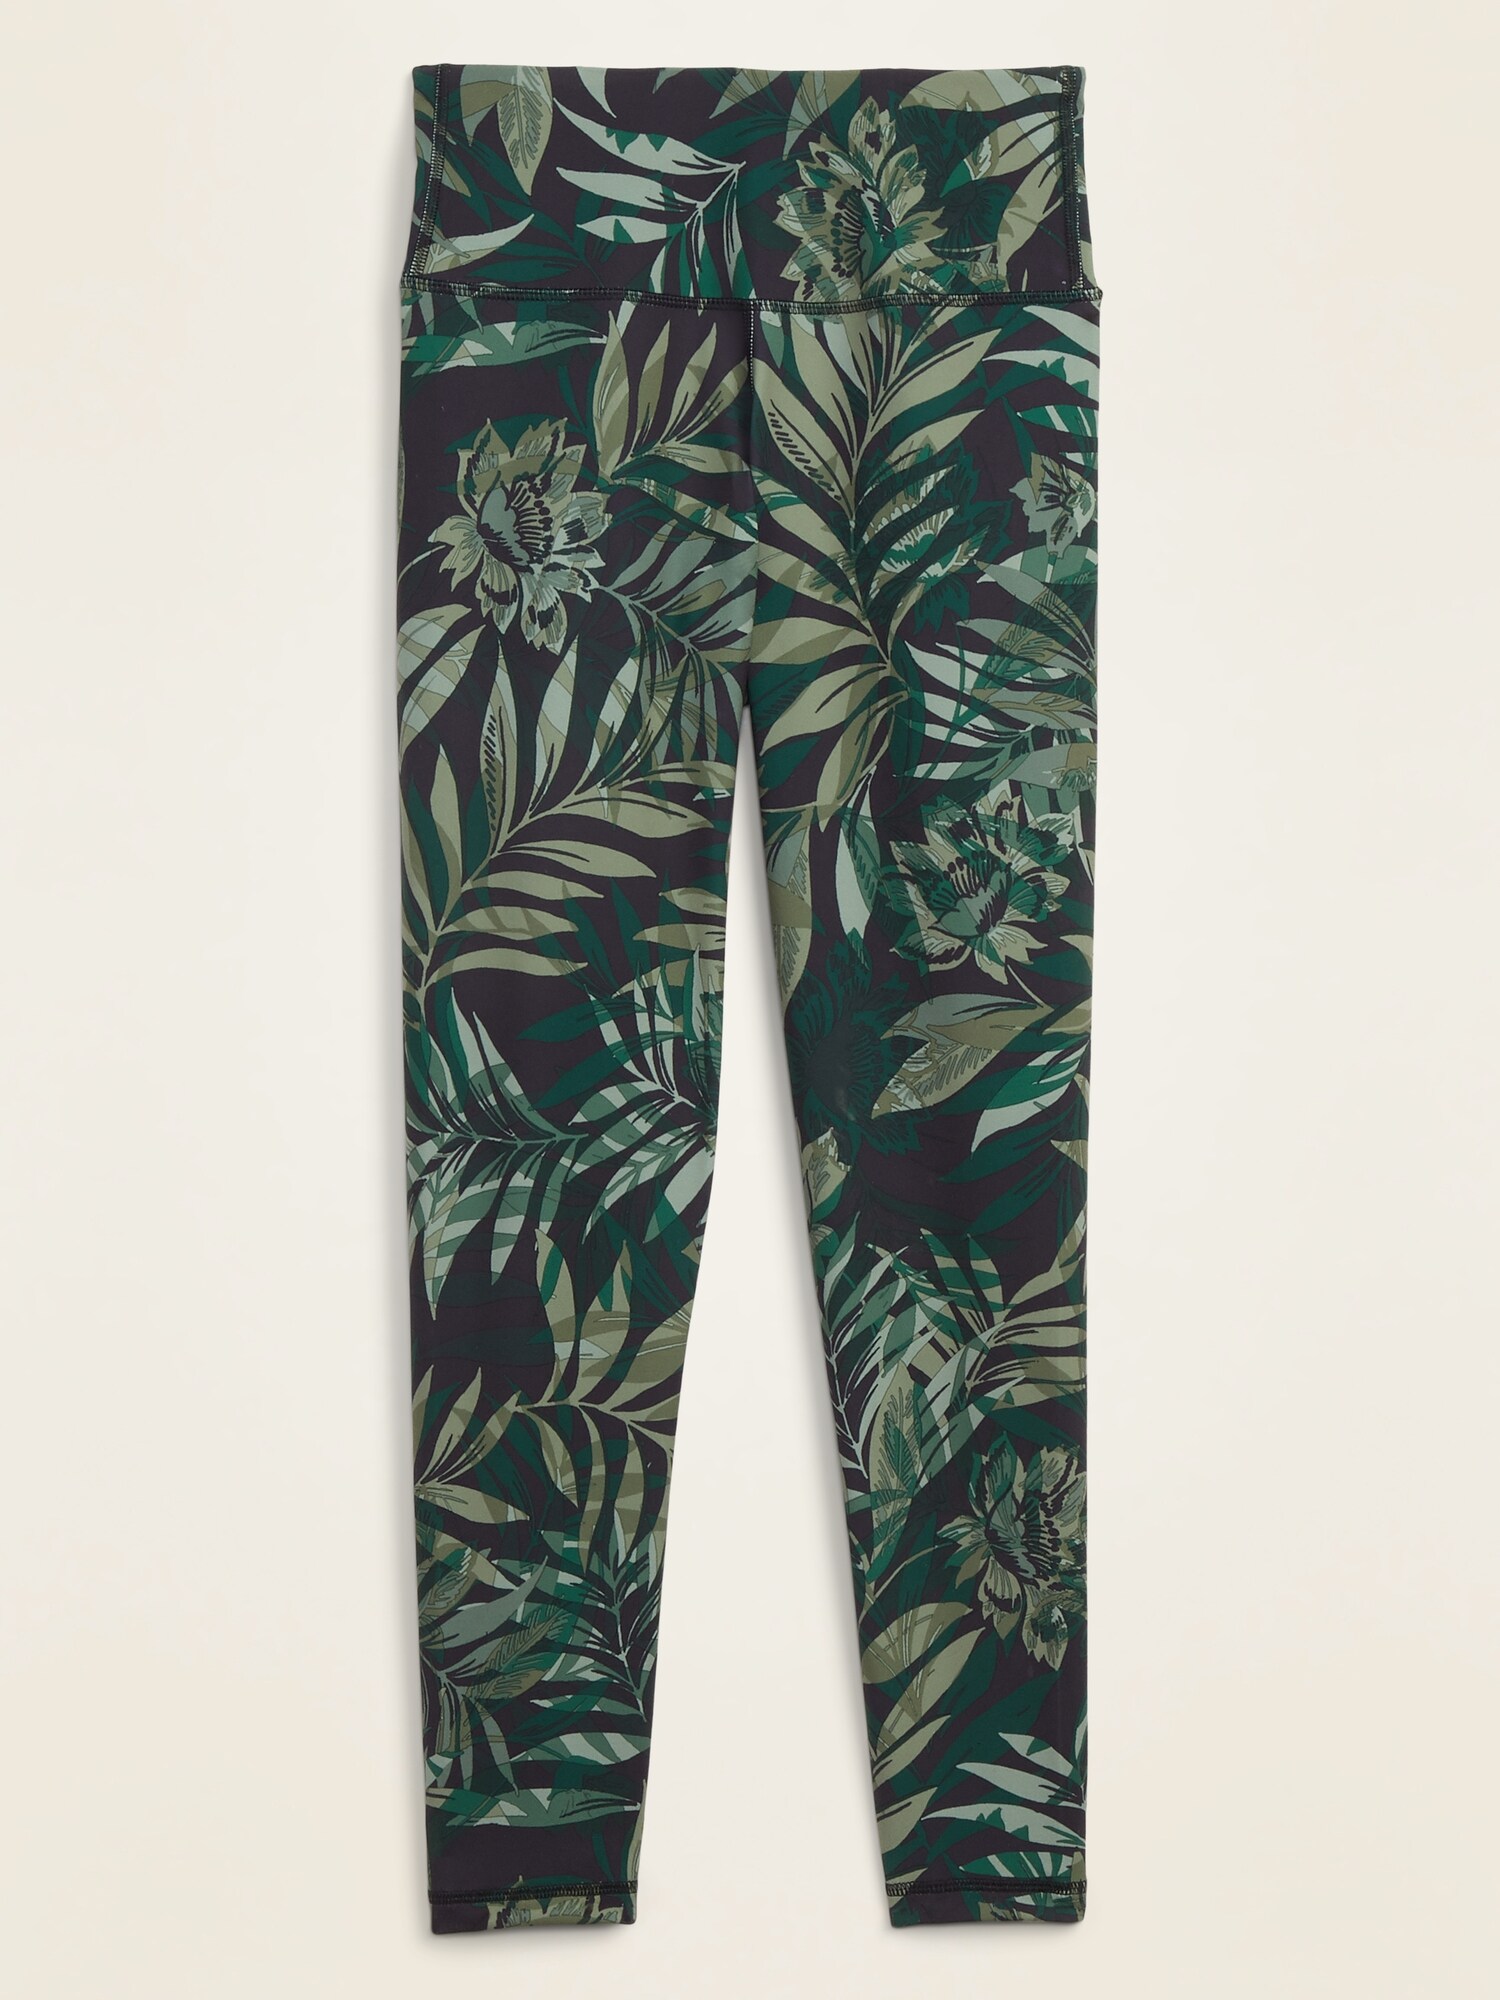 Old Navy - - Old Navy PINK CAMO Print High-Waisted Leggings - Size 6/8 to  22 (S to XXL)